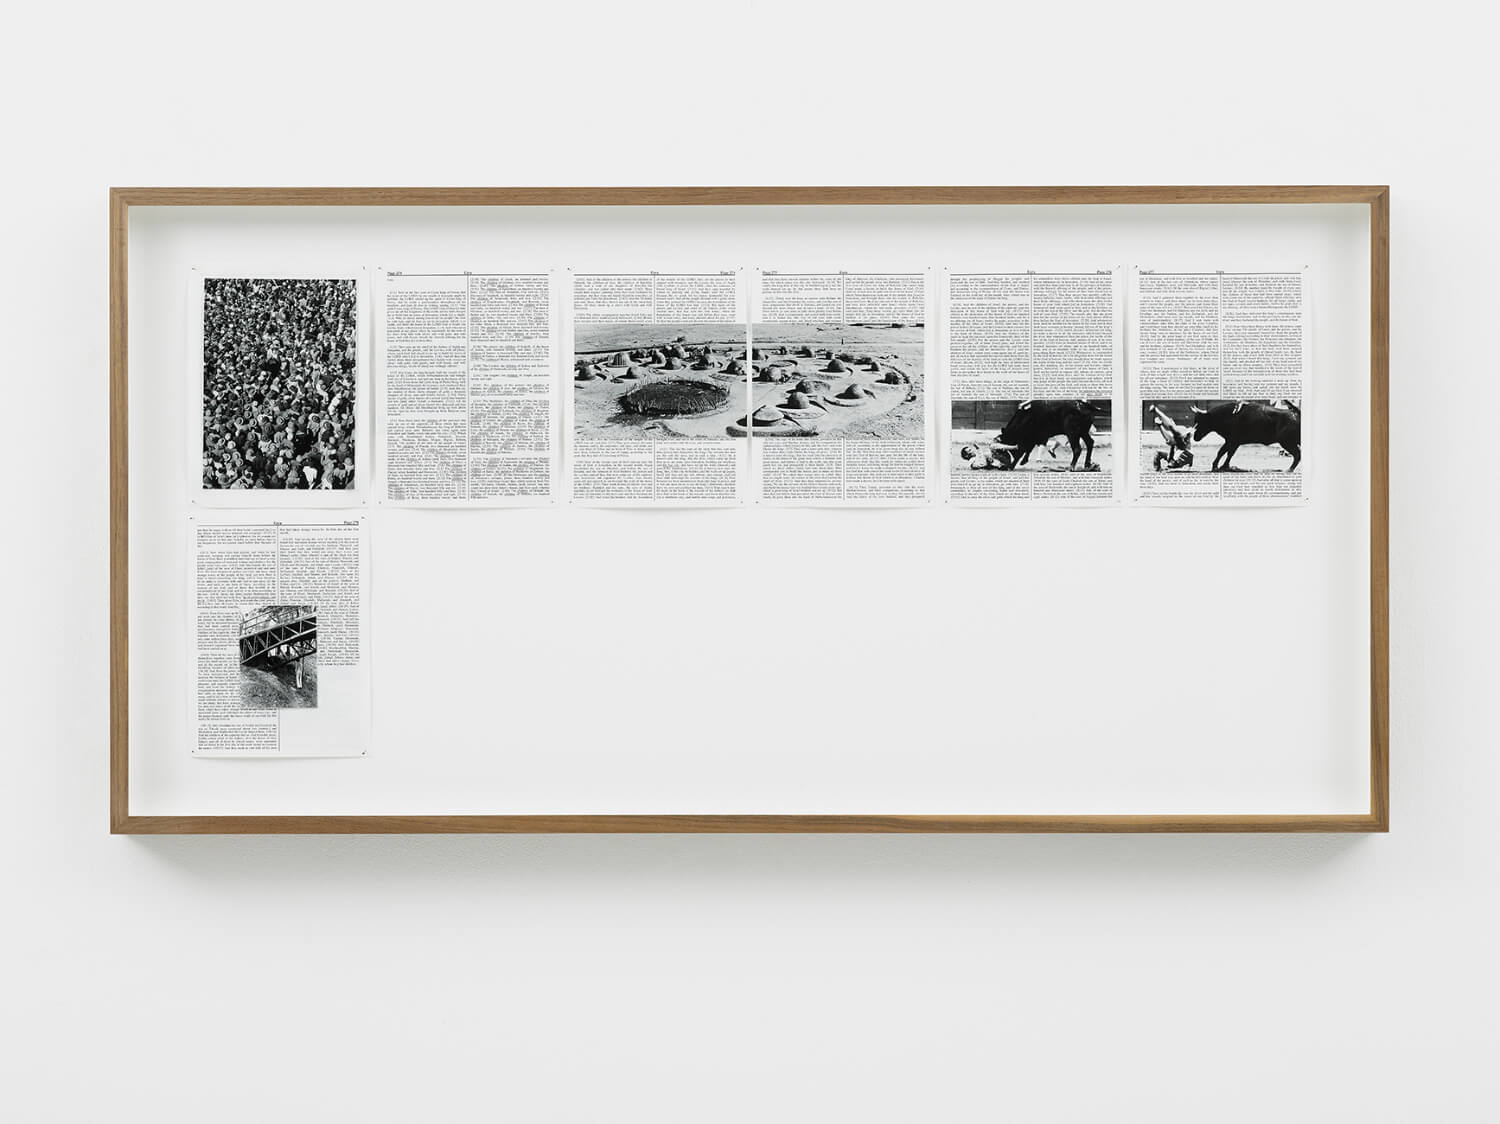  Ezra, Divine Violence, 2013, King James Bible, Hahnemühle print, brass pins, 1085mm x 535mm, Image courtesy of Lisson Gallery, London 